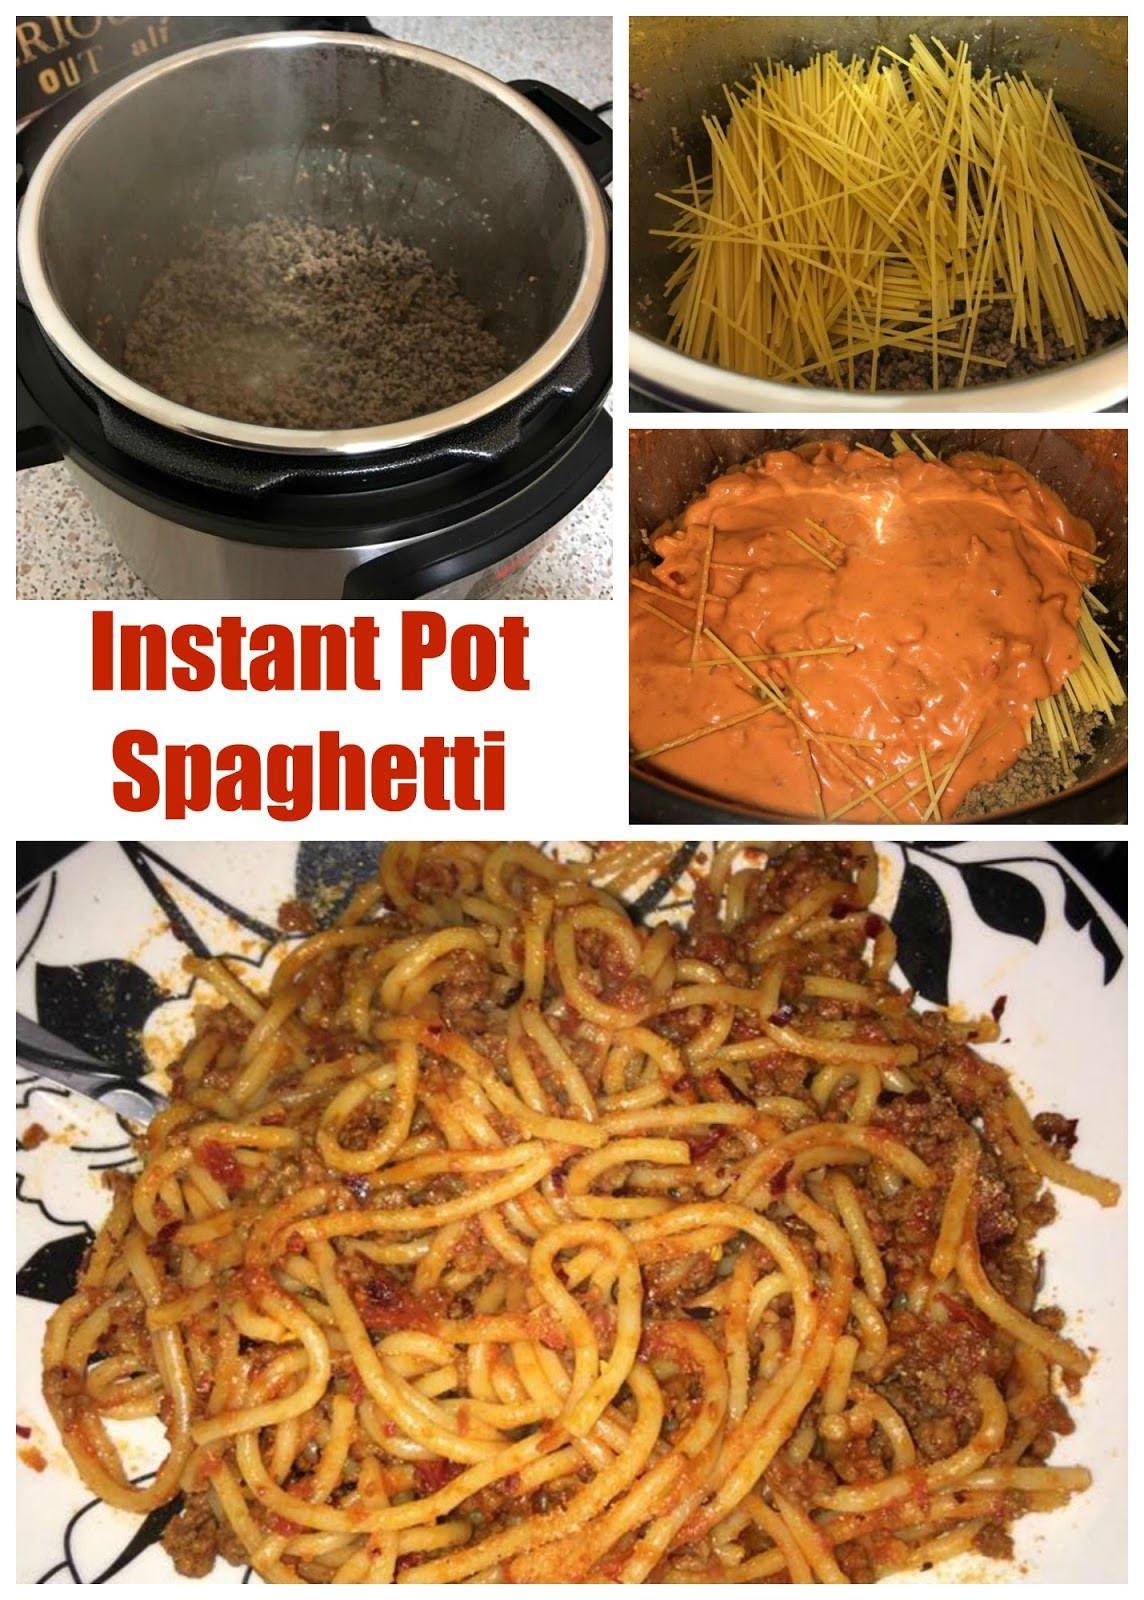 Instant Pot Spaghetti With Jar Sauce
 Reviews Chews & How Tos Instant Pot Spaghetti